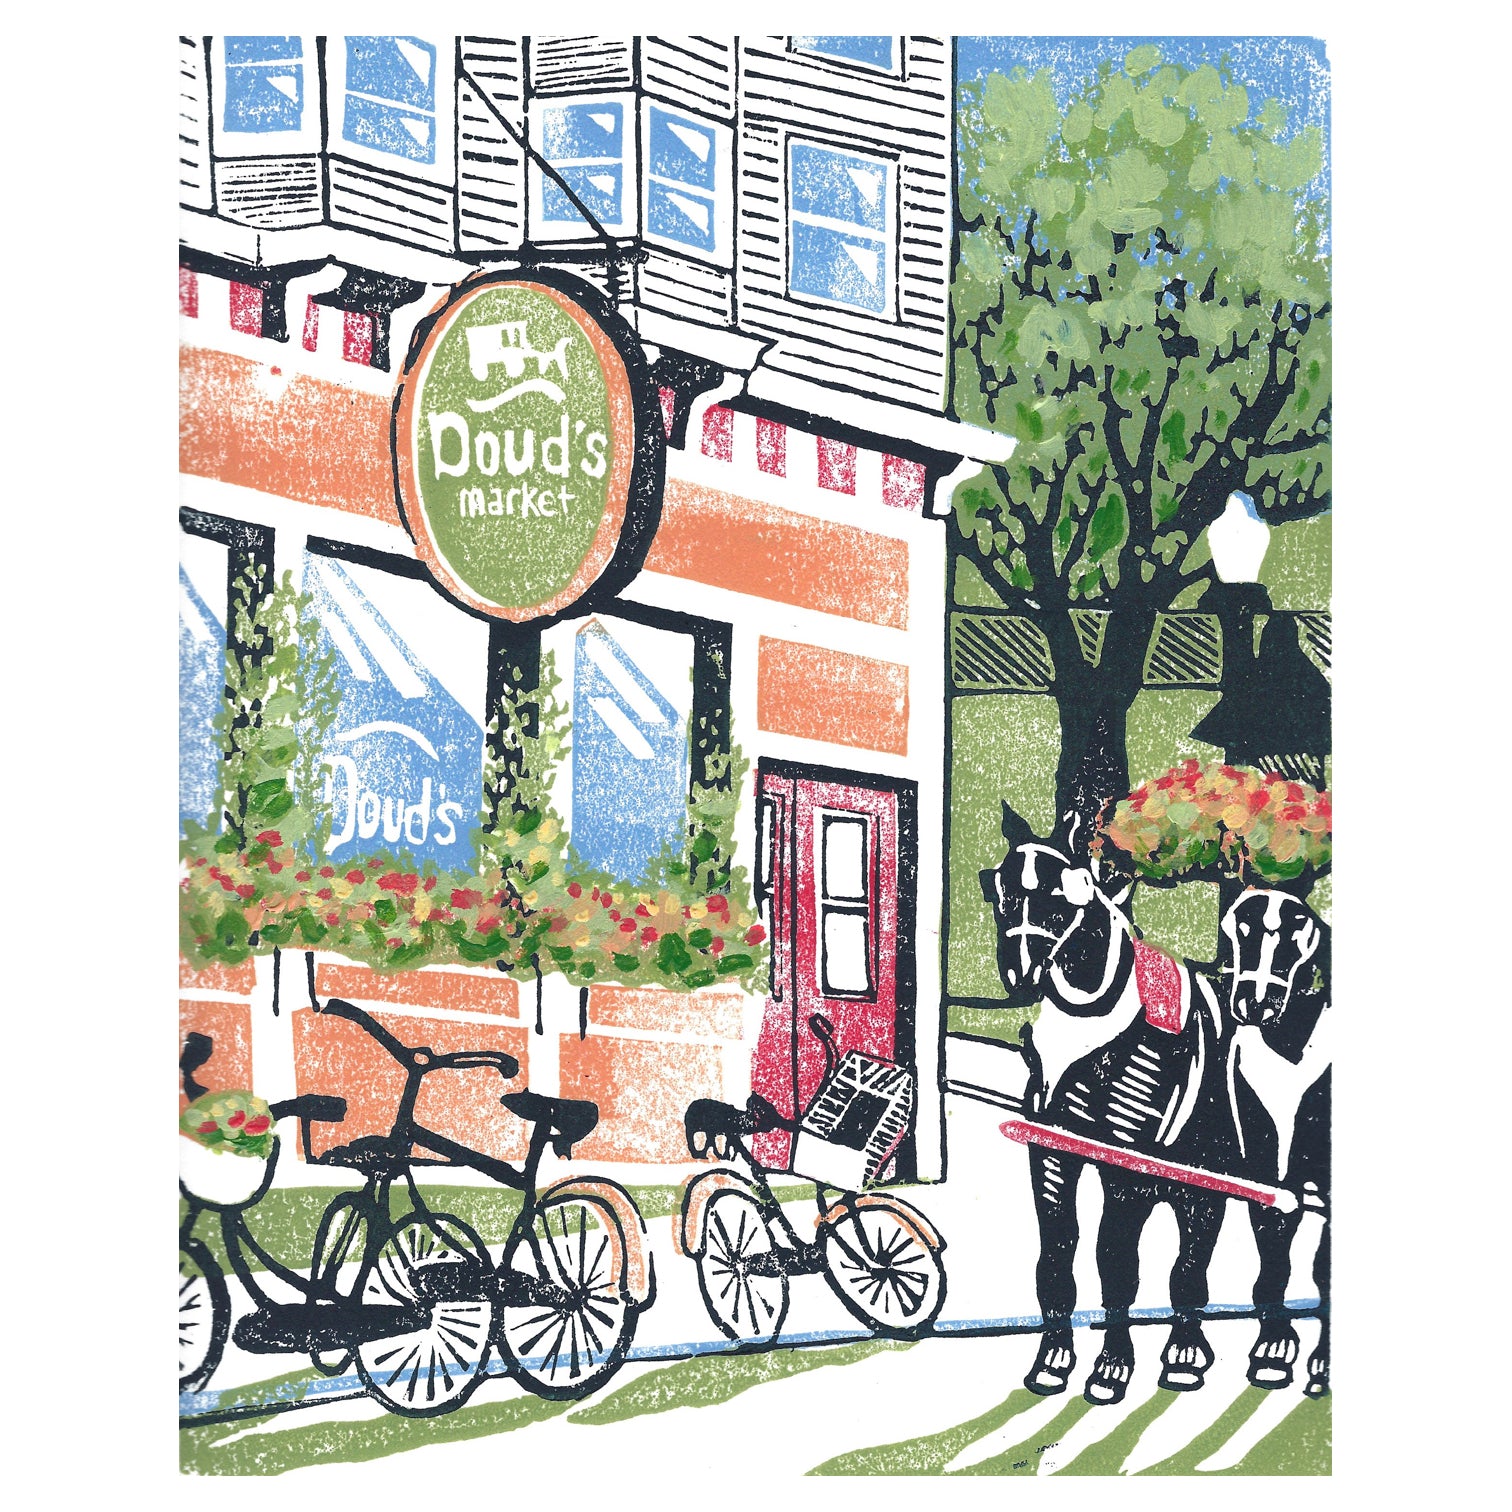 Mackinac Island art by printmaker Natalia Wohletz of Peninsula Prints titled Doud's Market.  Inspired by one of America's oldest family-operated grocery stores.